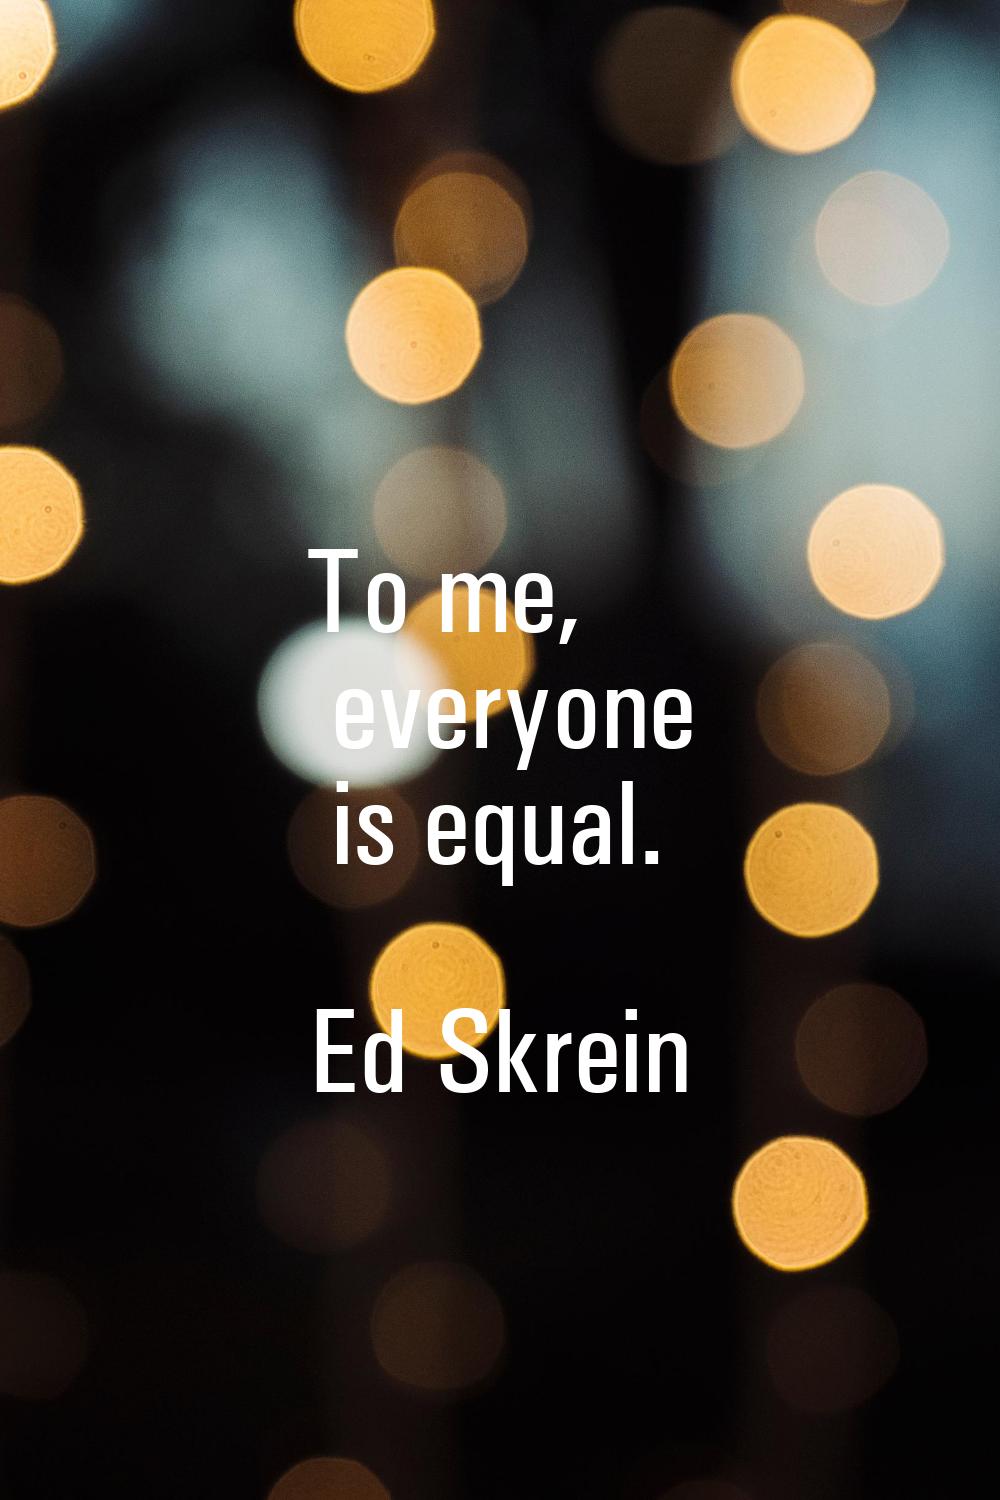 To me, everyone is equal.